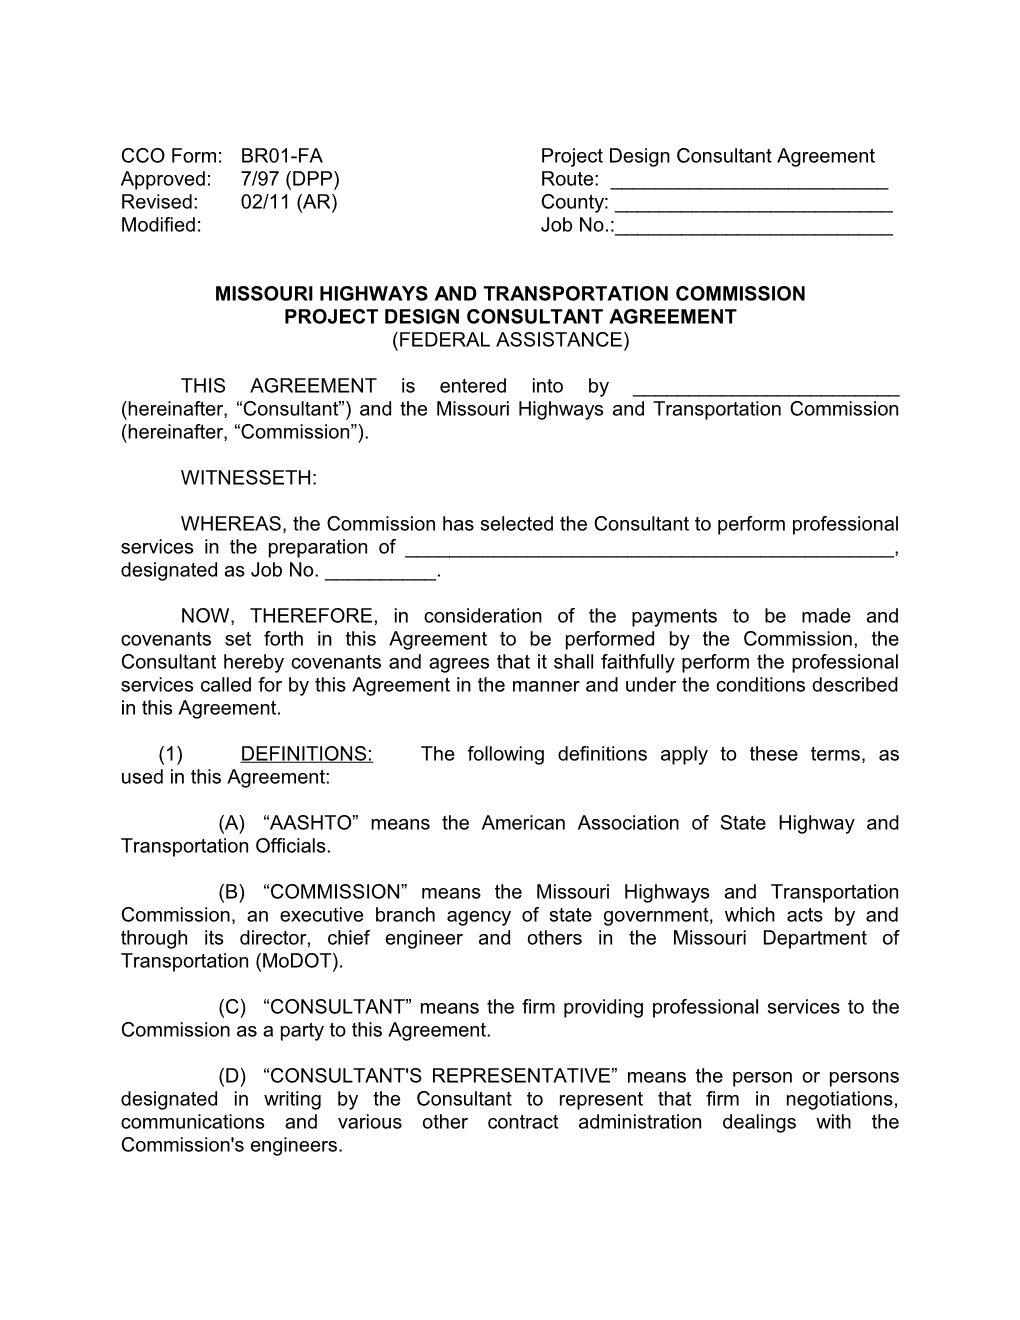 CCO Form: BR01-Faproject Design Consultant Agreement